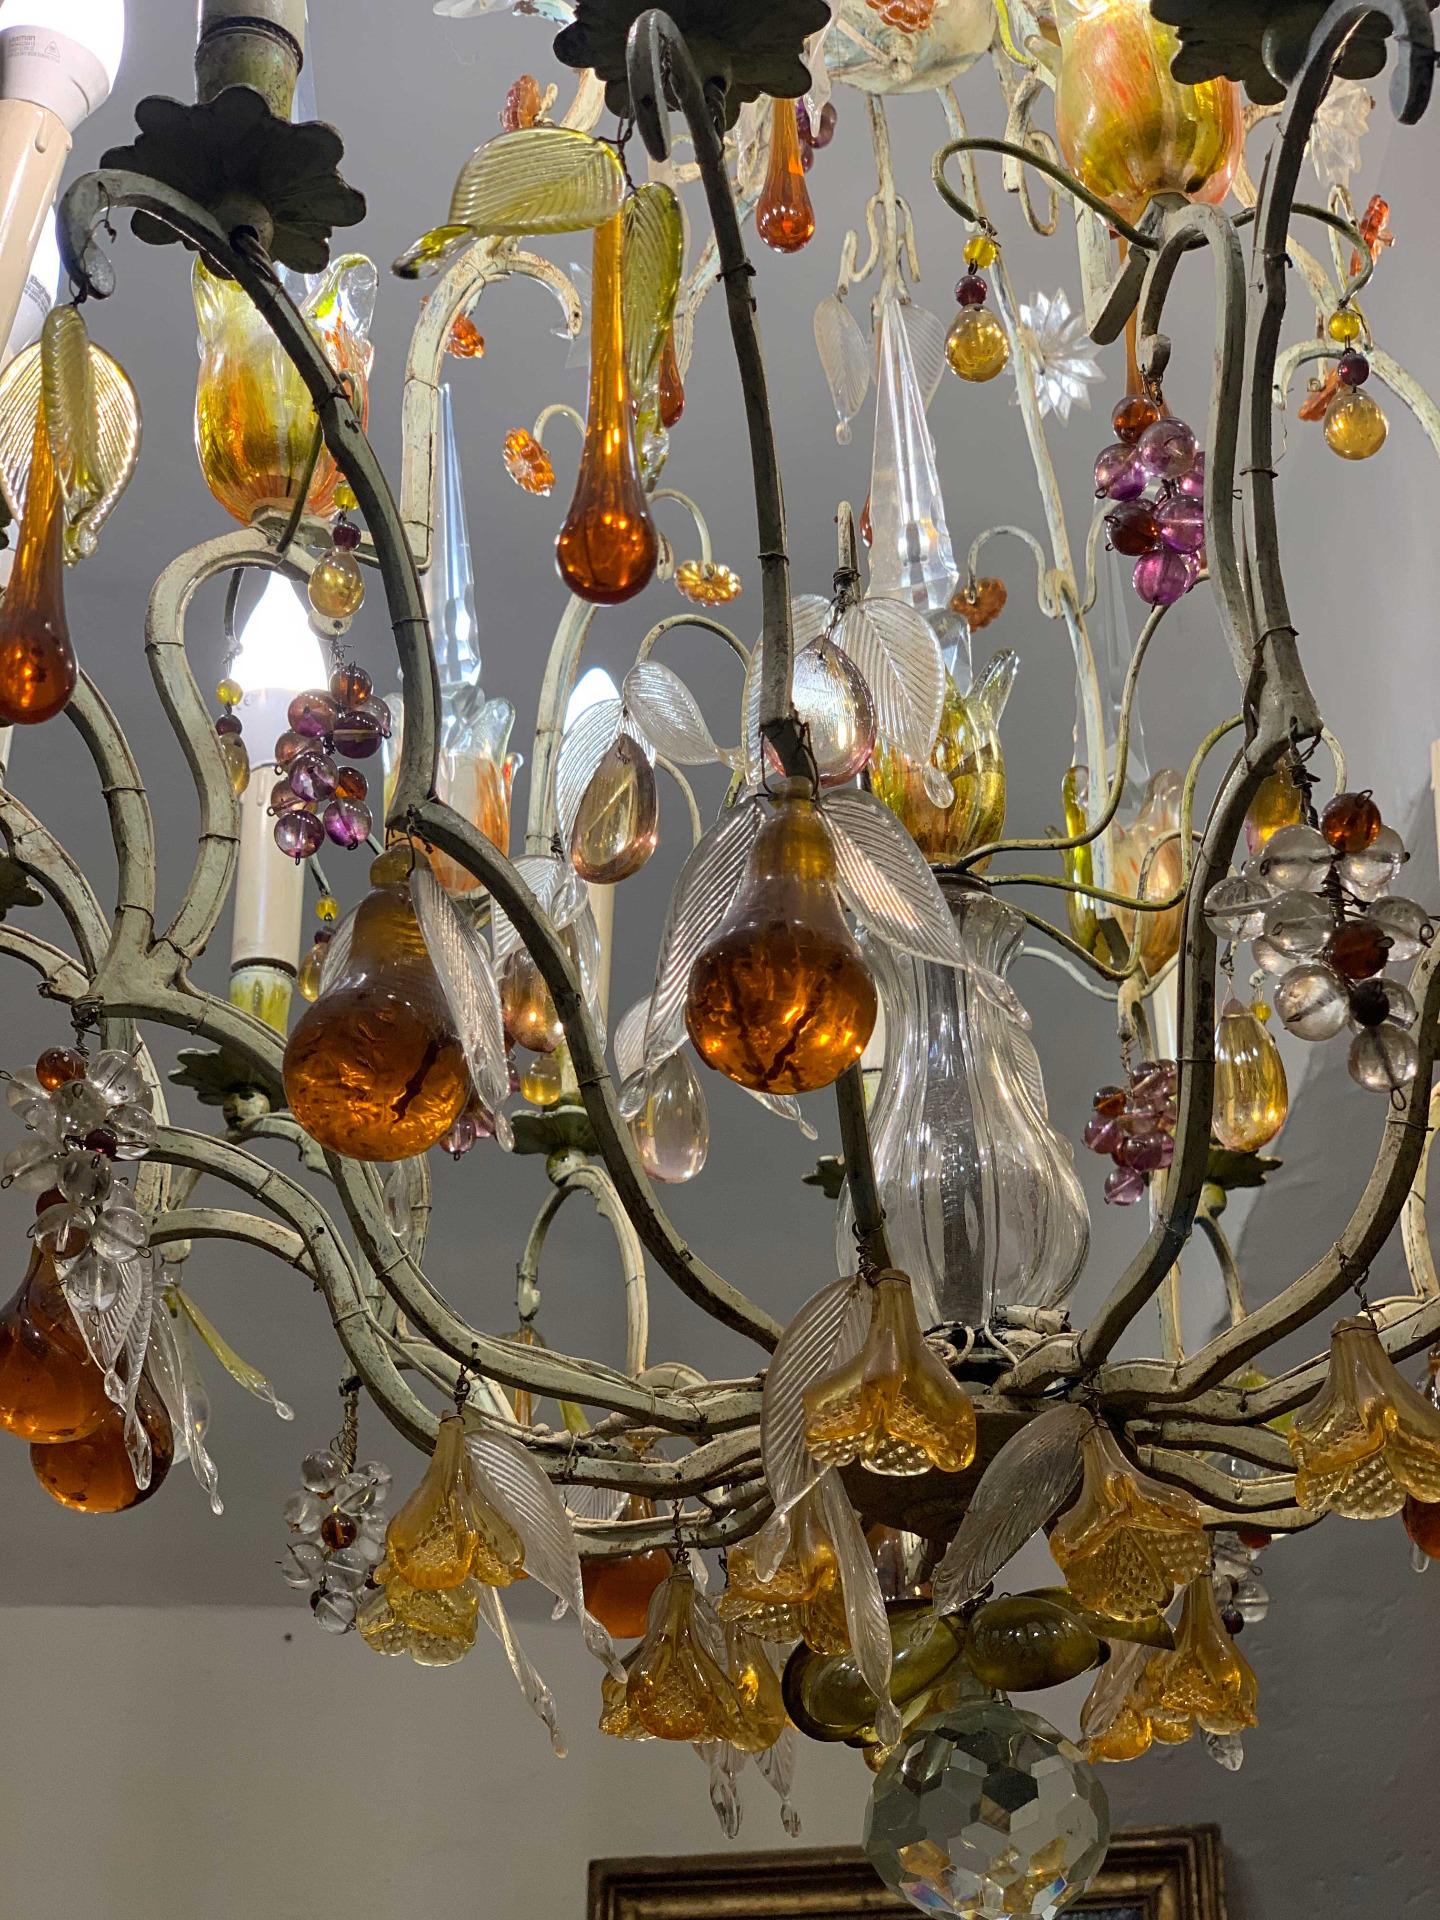 19th CENTURY LACQUERED BRONZE CHANDELIER WITH GLASS FRUIT For Sale 8